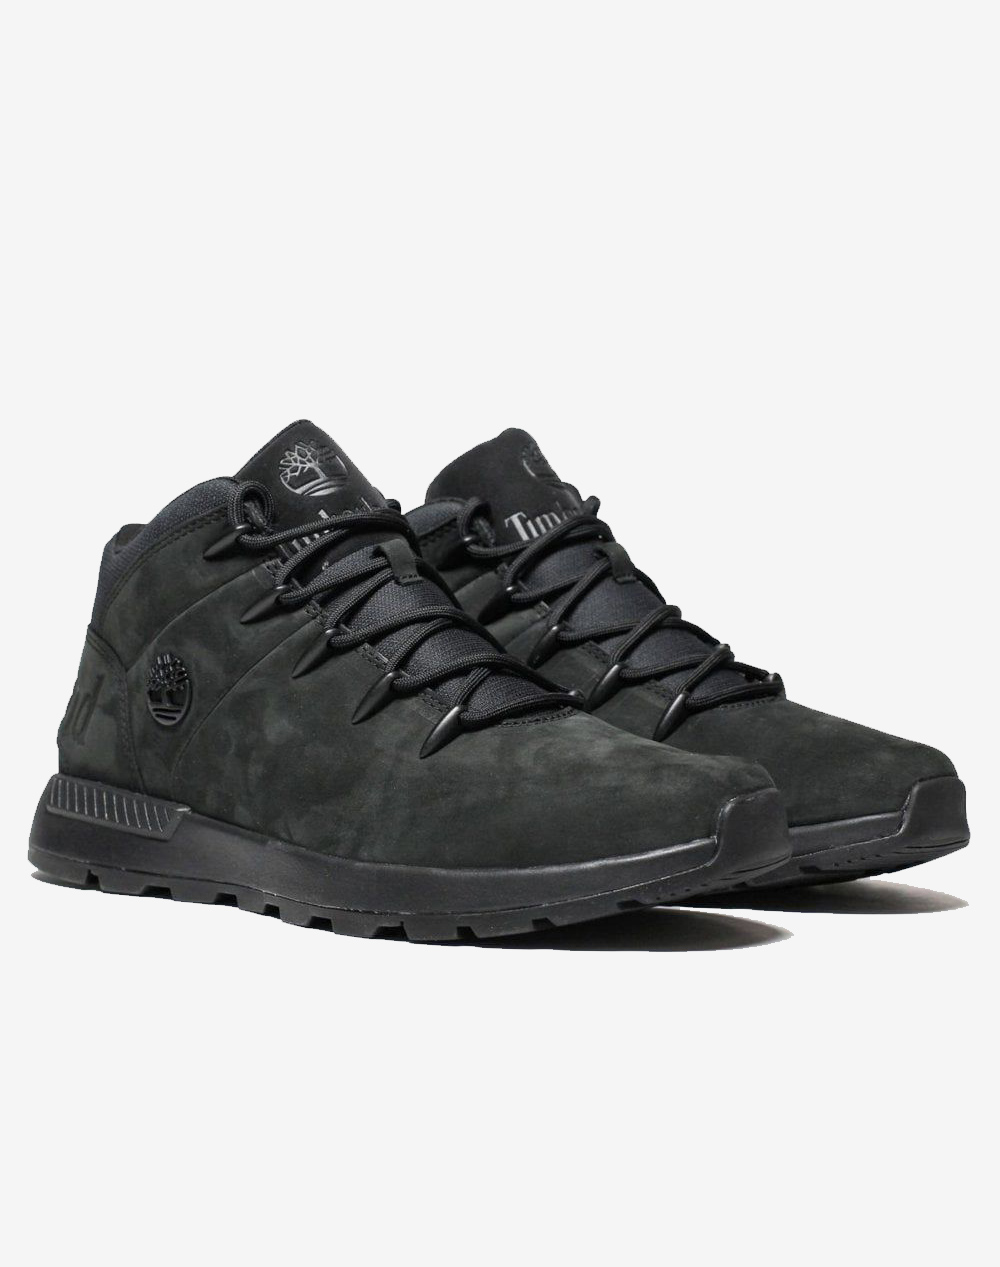 TIMBERLAND MID LACE UP BOOTS